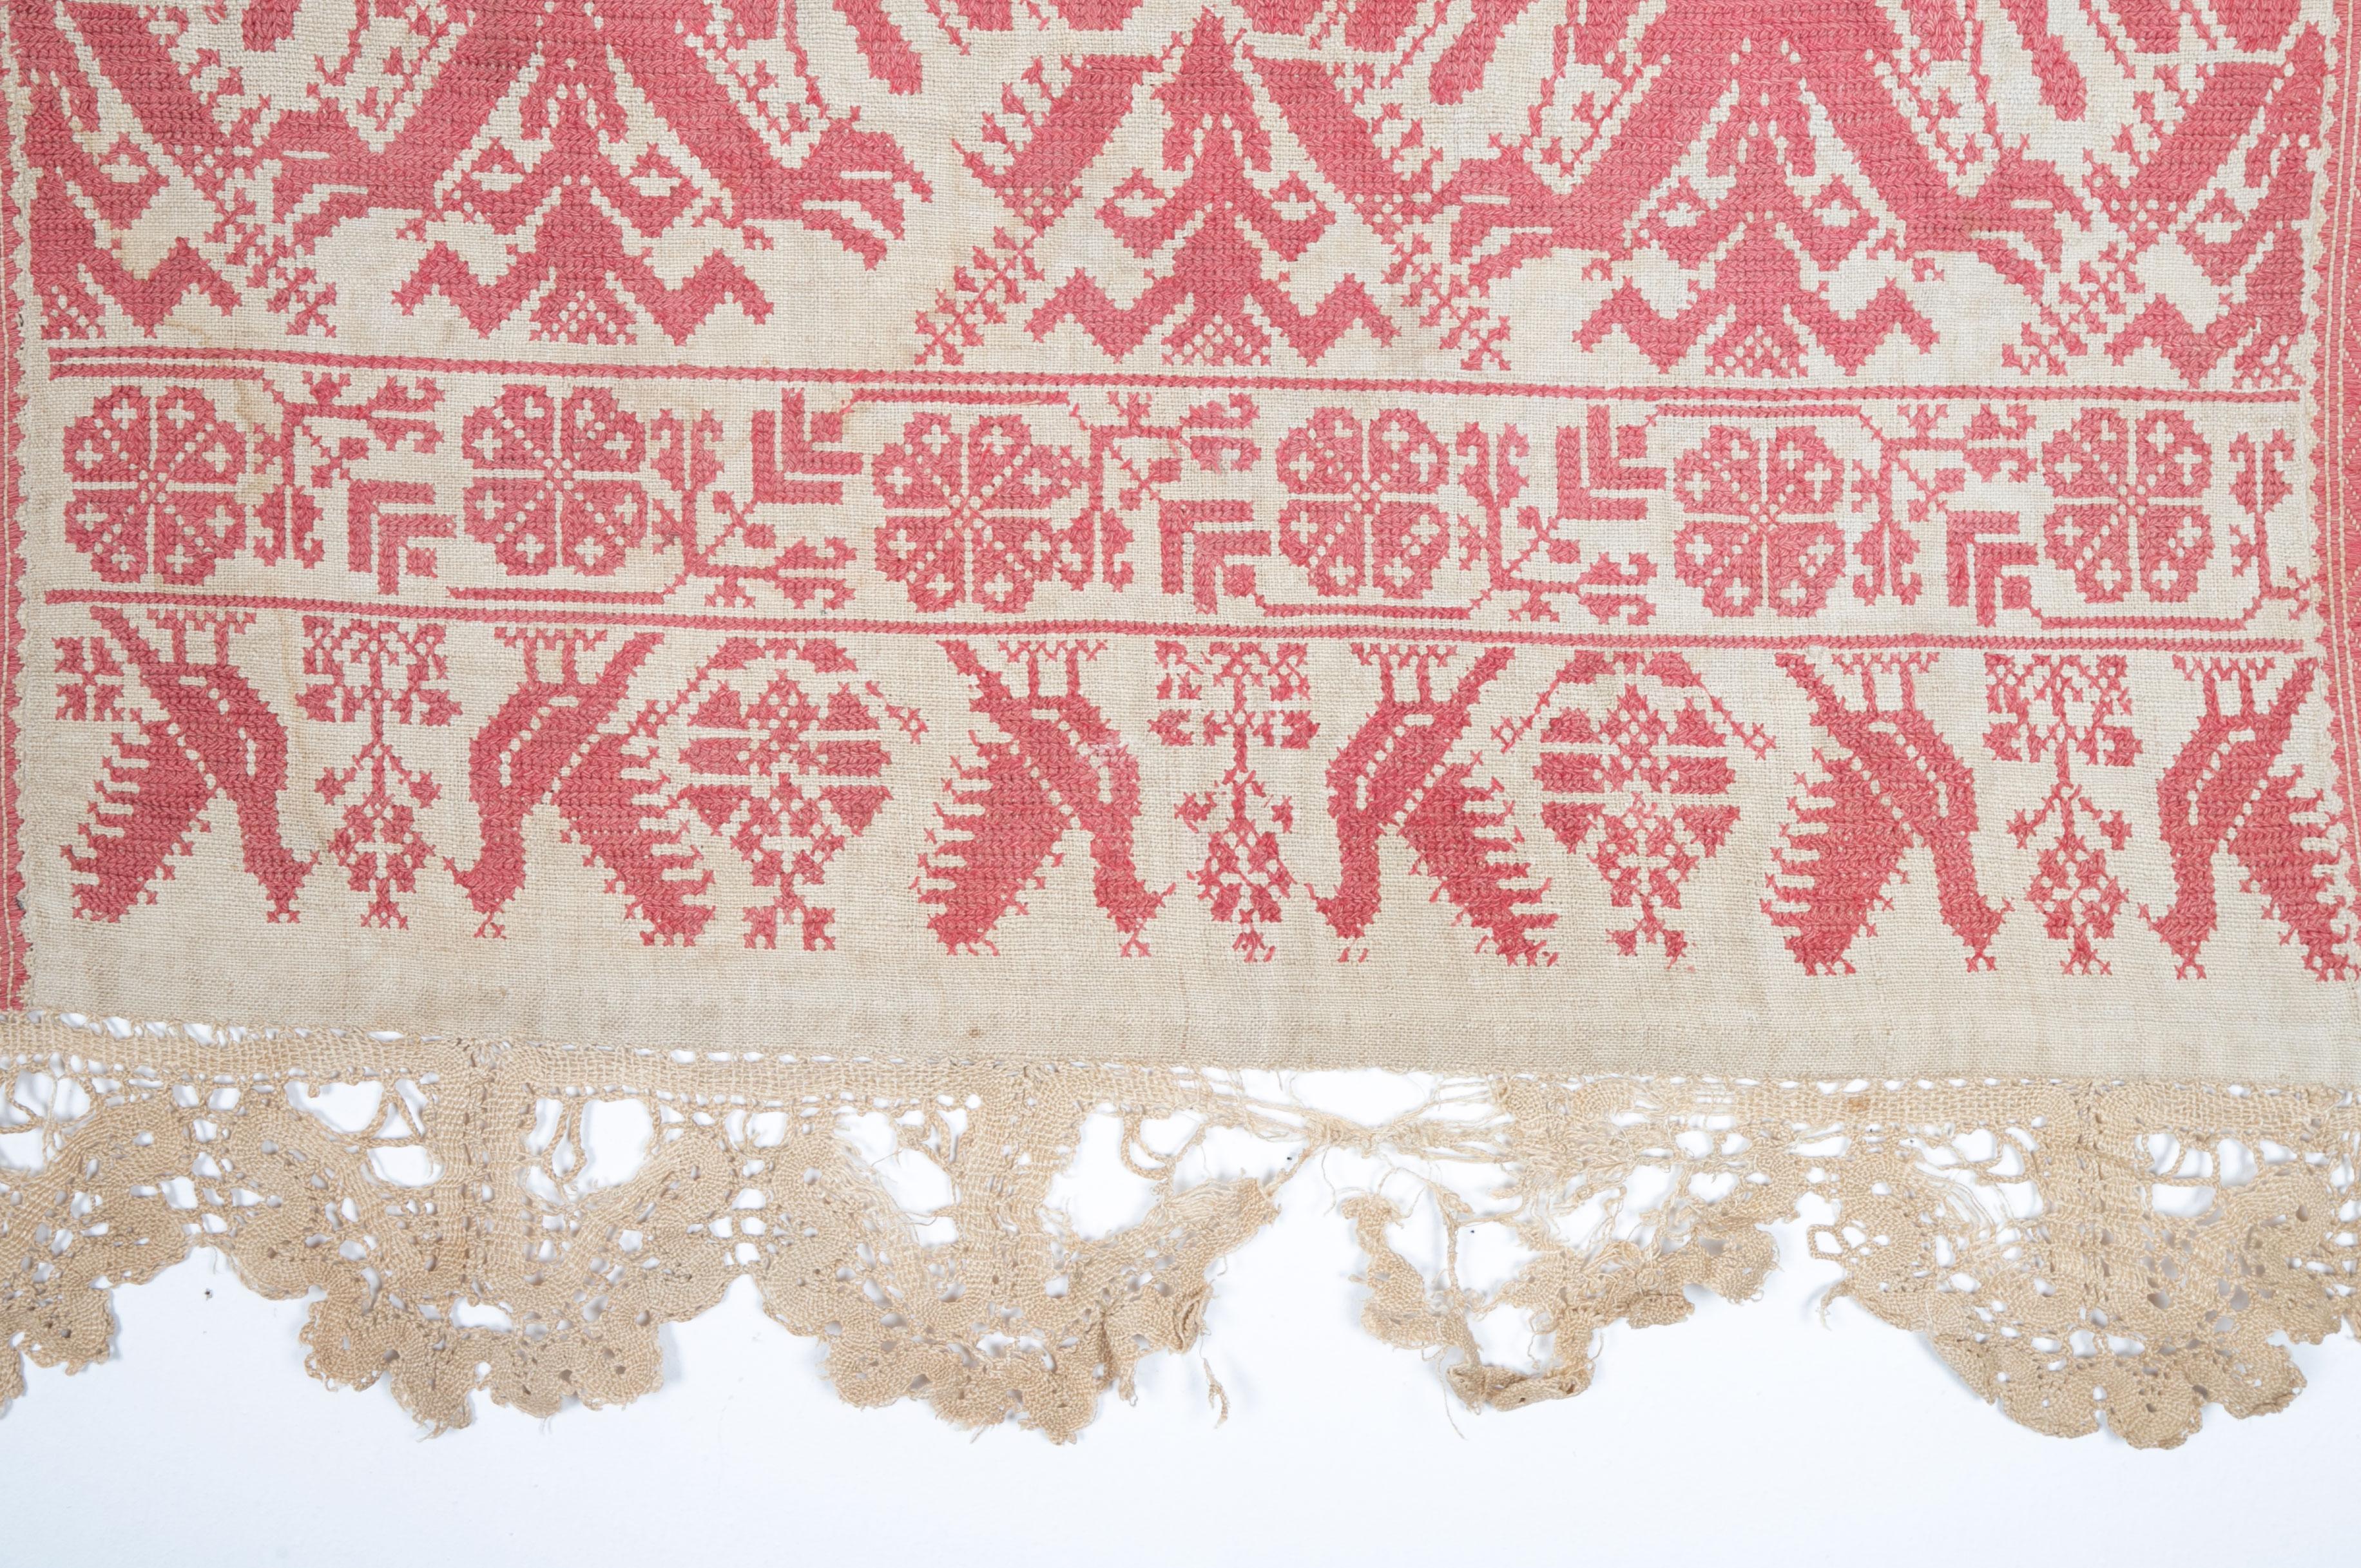 Cotton Antique Russian Embroidery, Late 19th Century